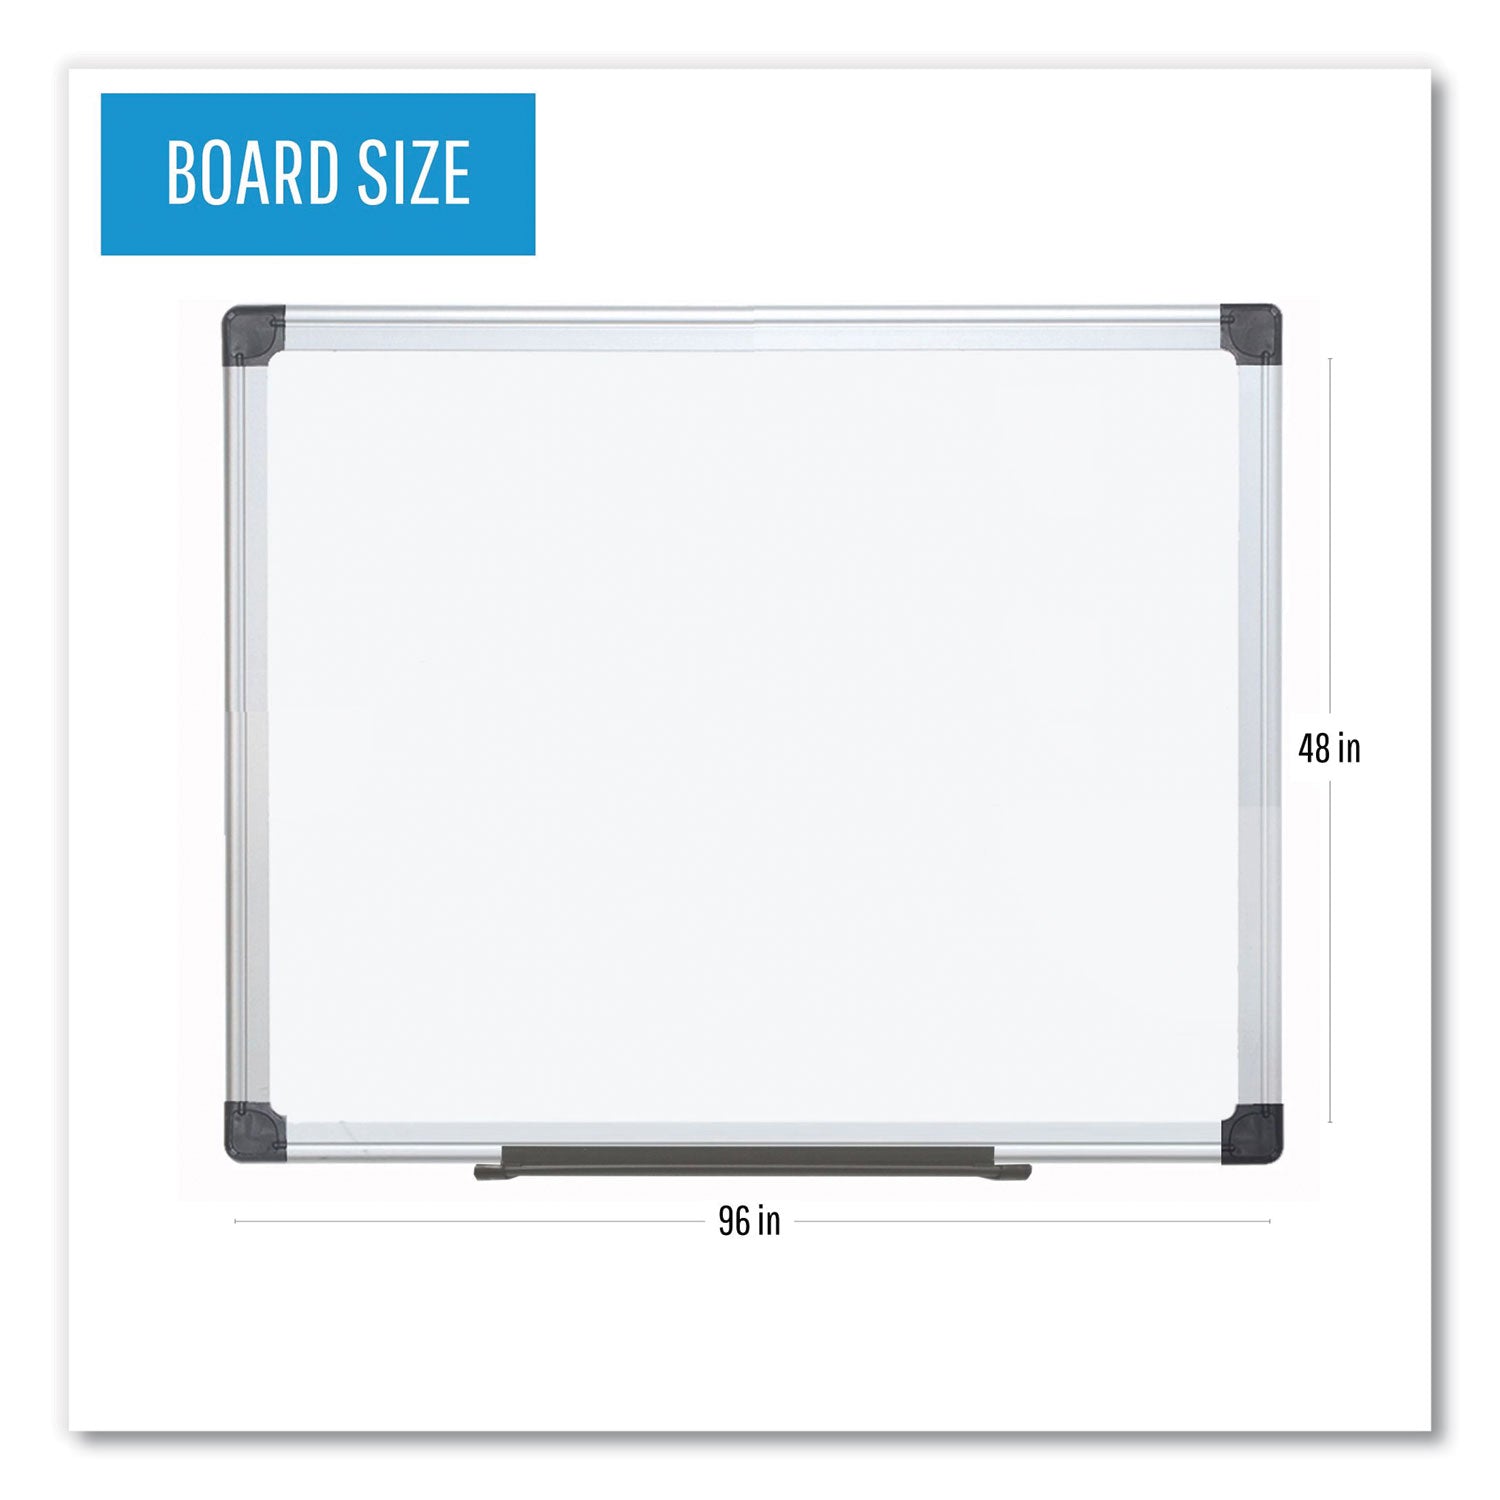 Value Lacquered Steel Magnetic Dry Erase Board, 96 x 48, White Surface, Silver Aluminum Frame - 